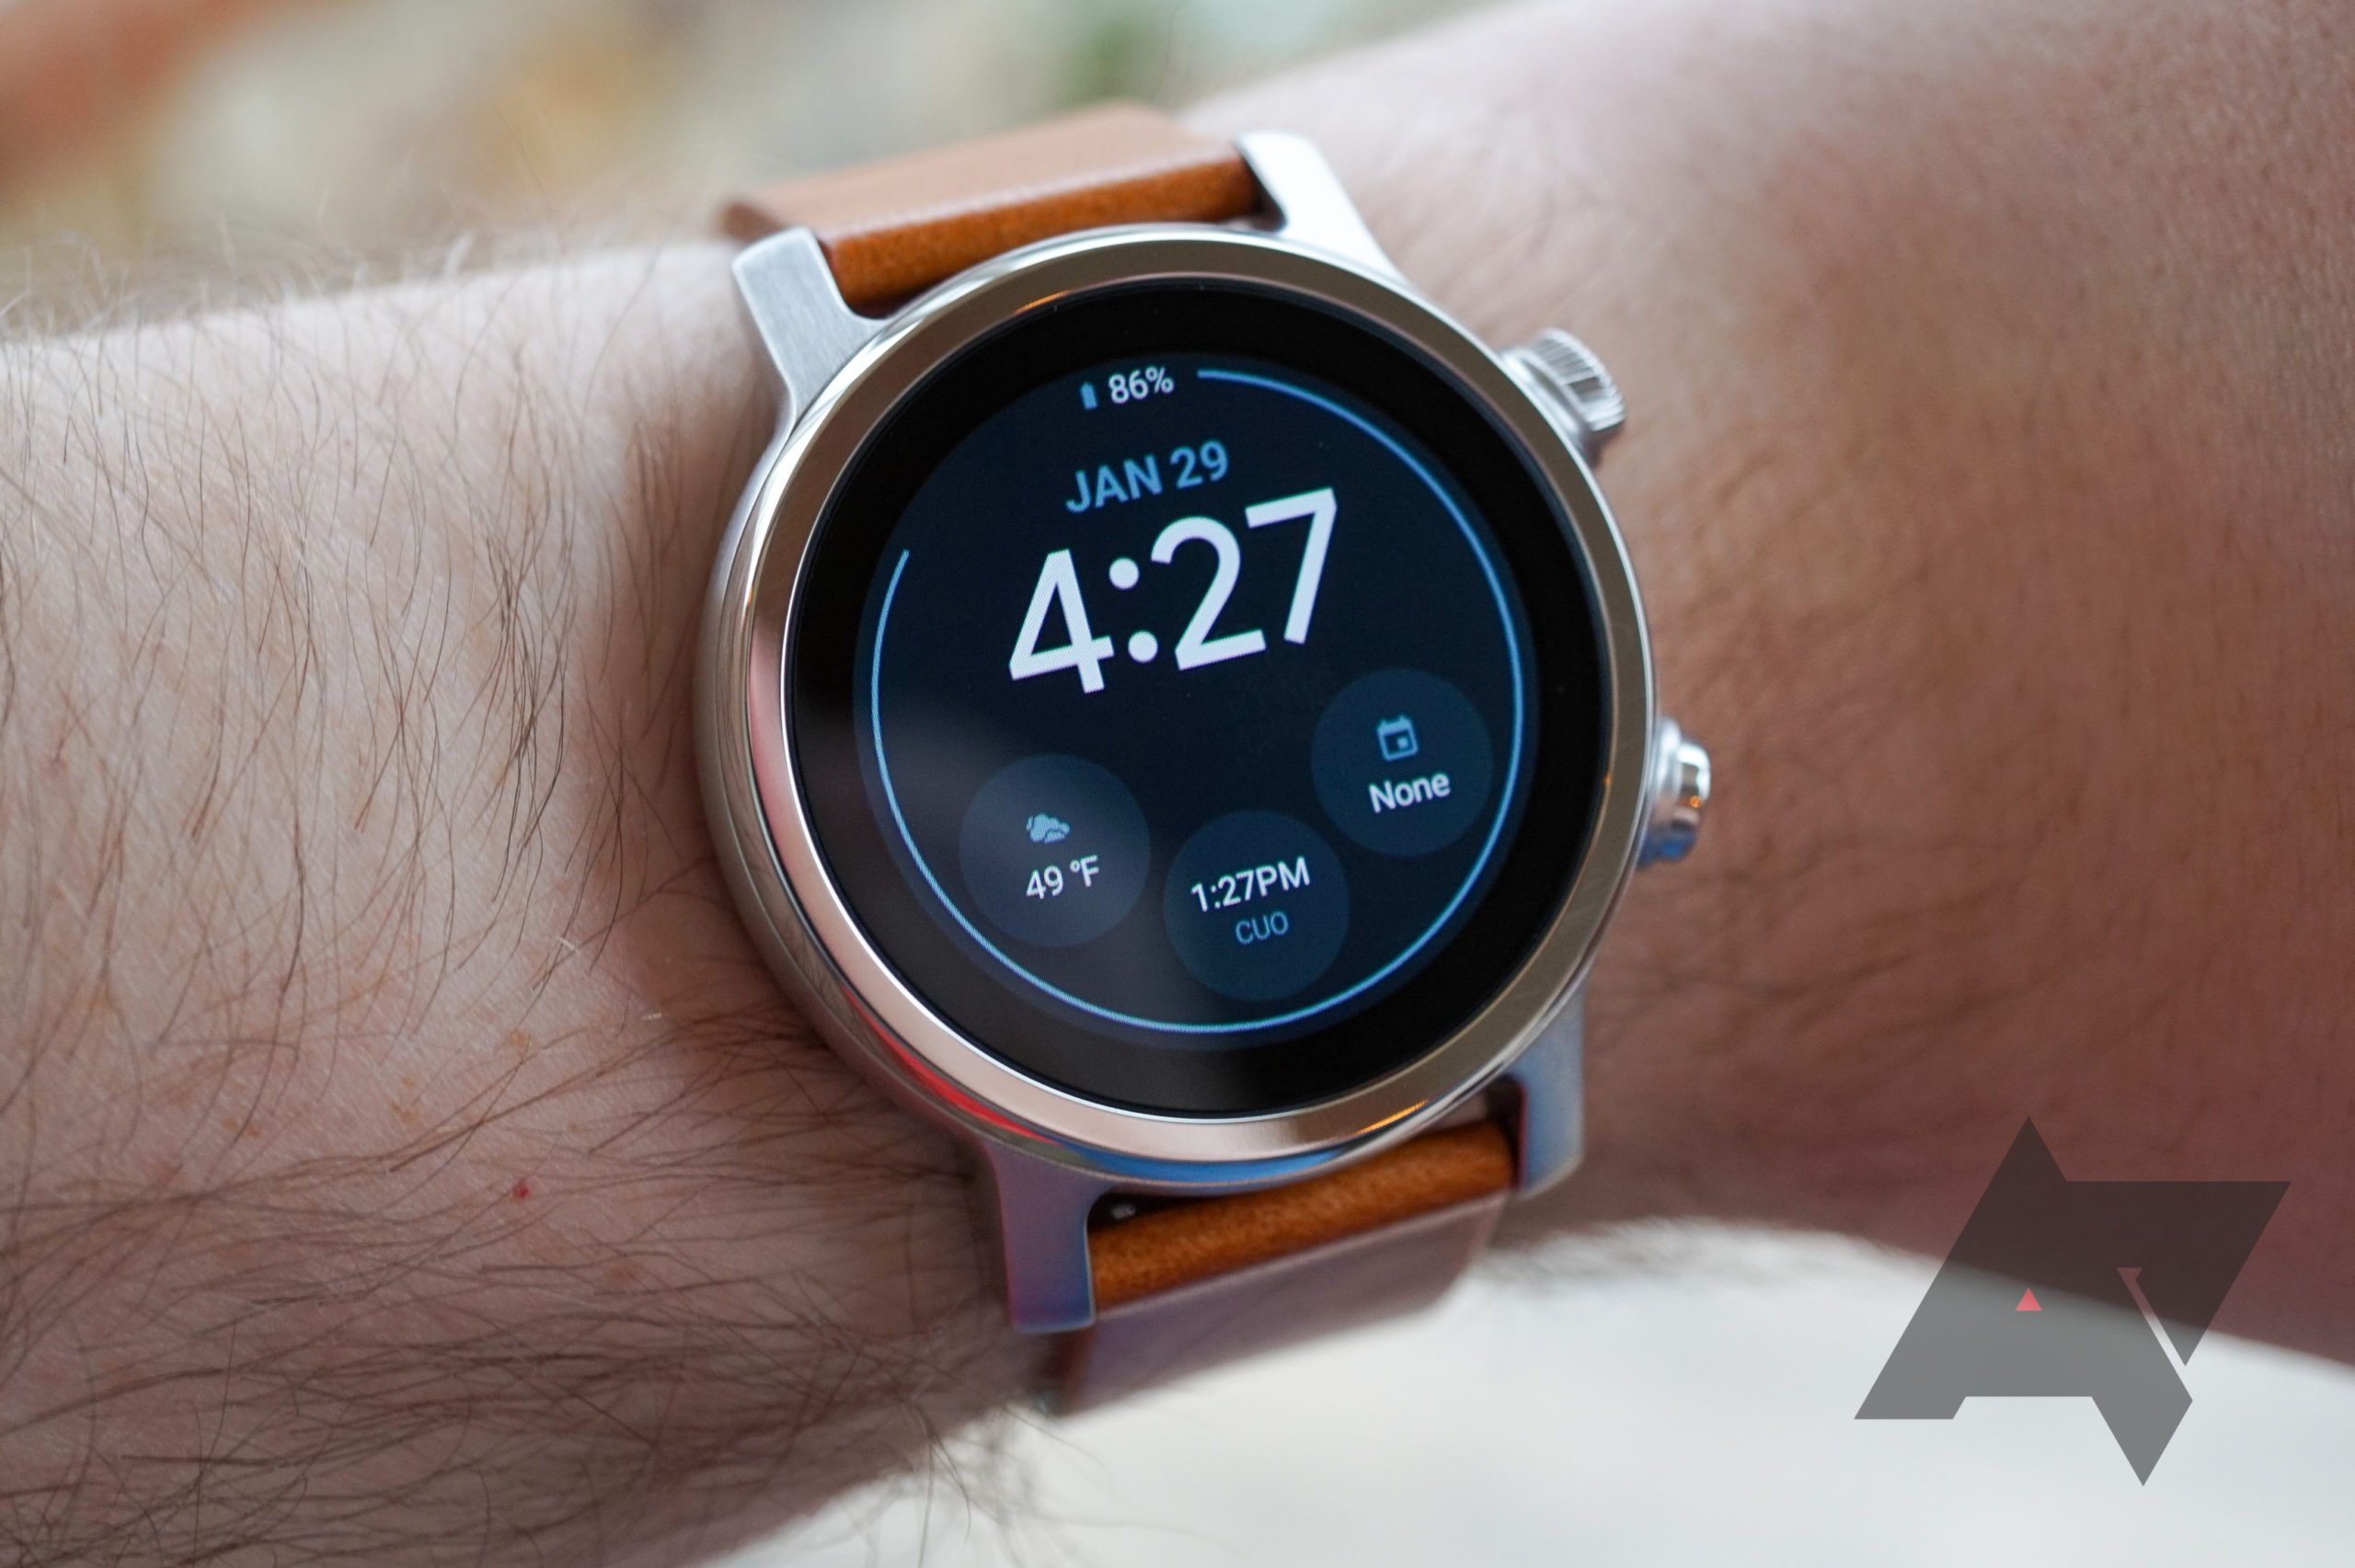 There's a new Motorola smartwatch coming in 'early 2022,' but bigger remain